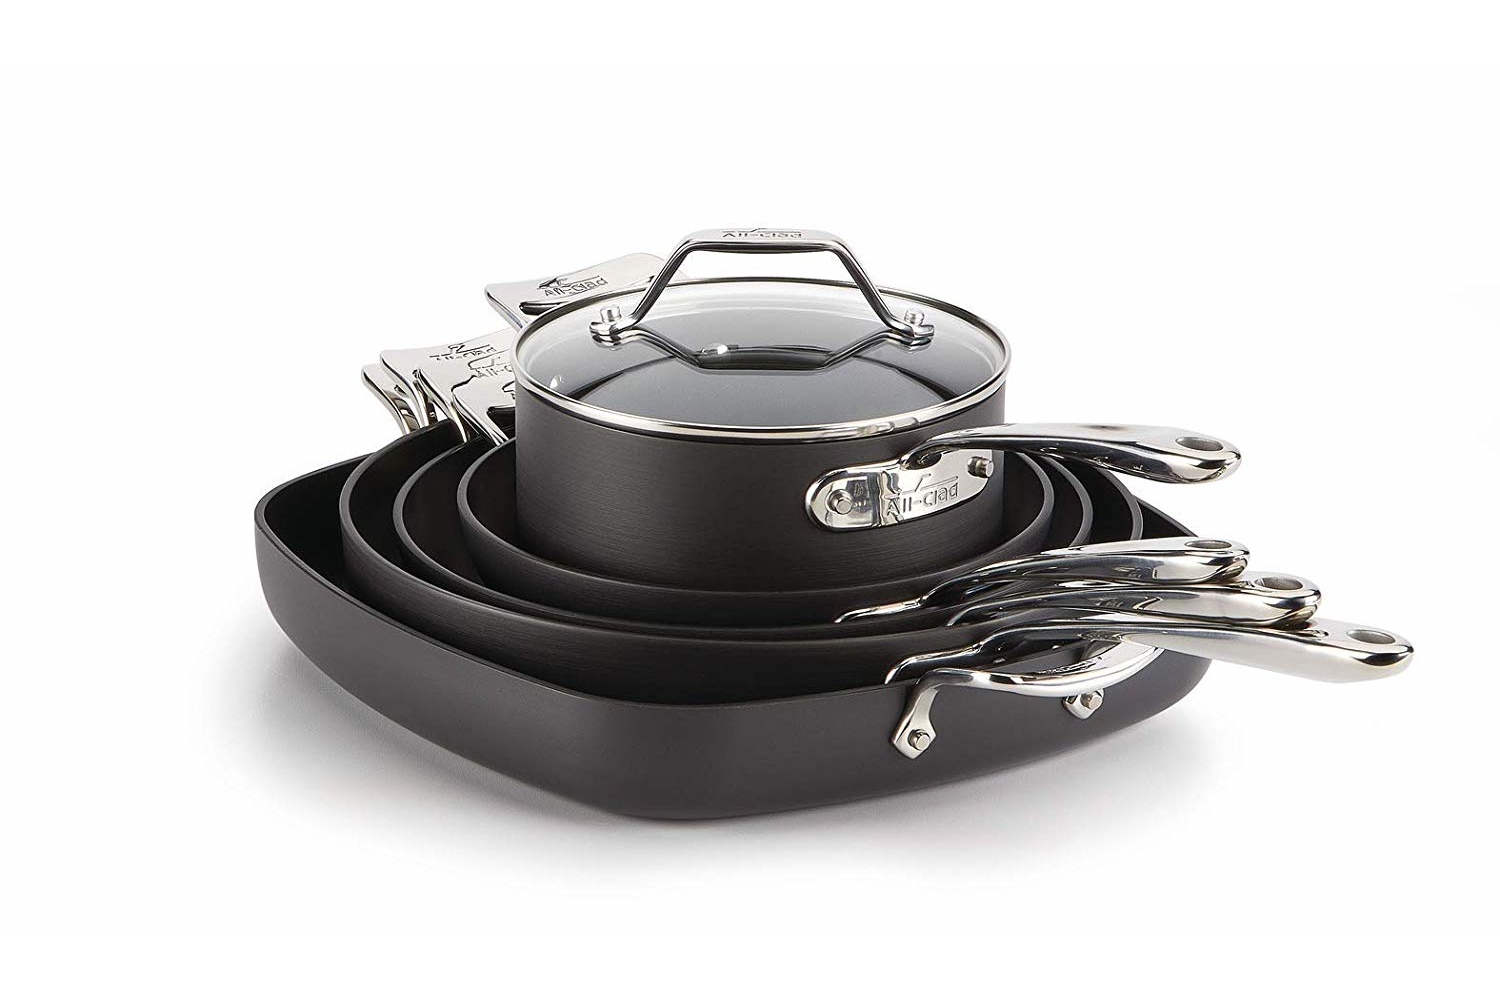 All-Clad Essentials Nonstick Cookware (2.5 Quart Sauce Pan with Lid)